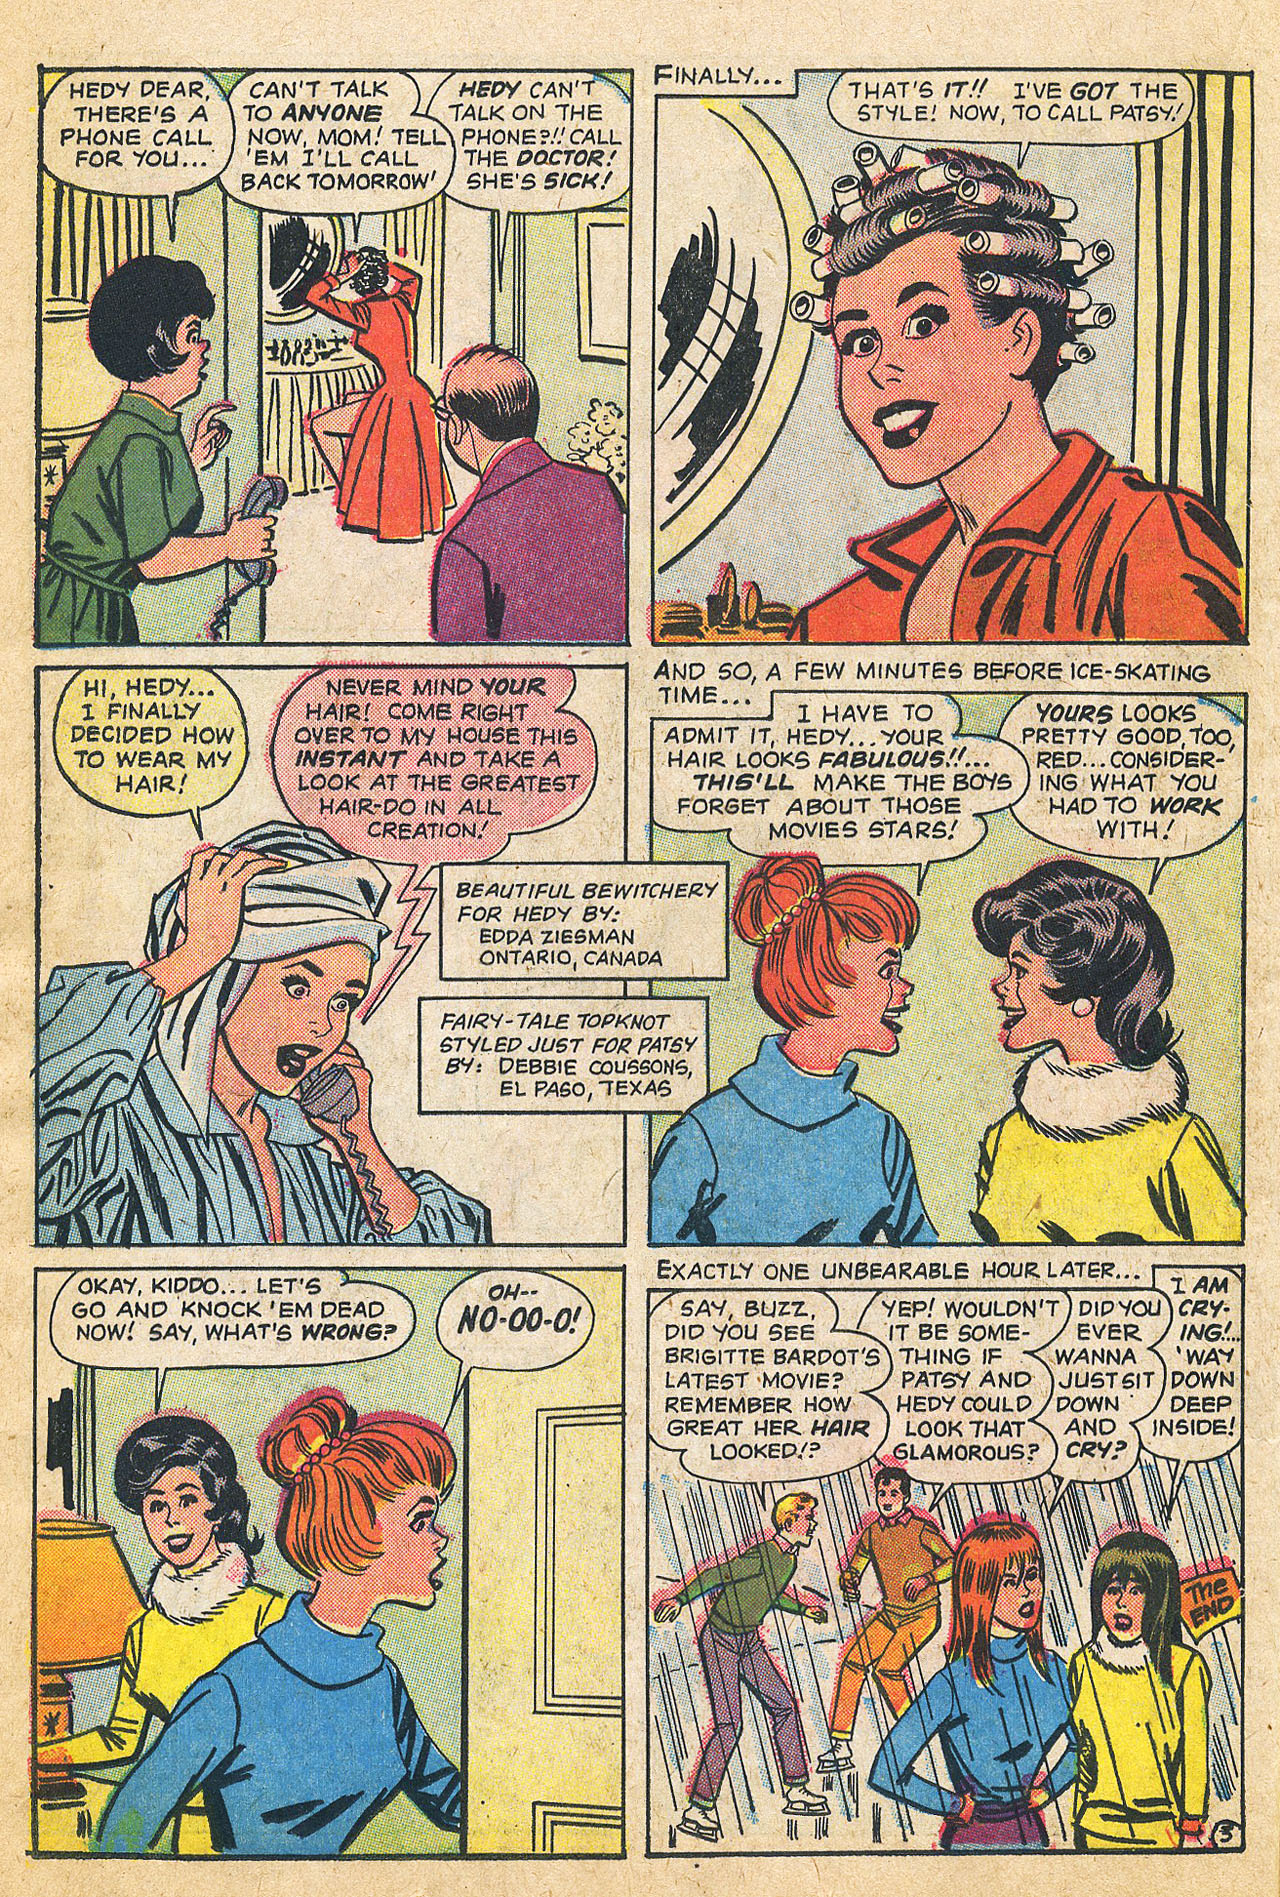 Read online Patsy and Hedy comic -  Issue #88 - 22